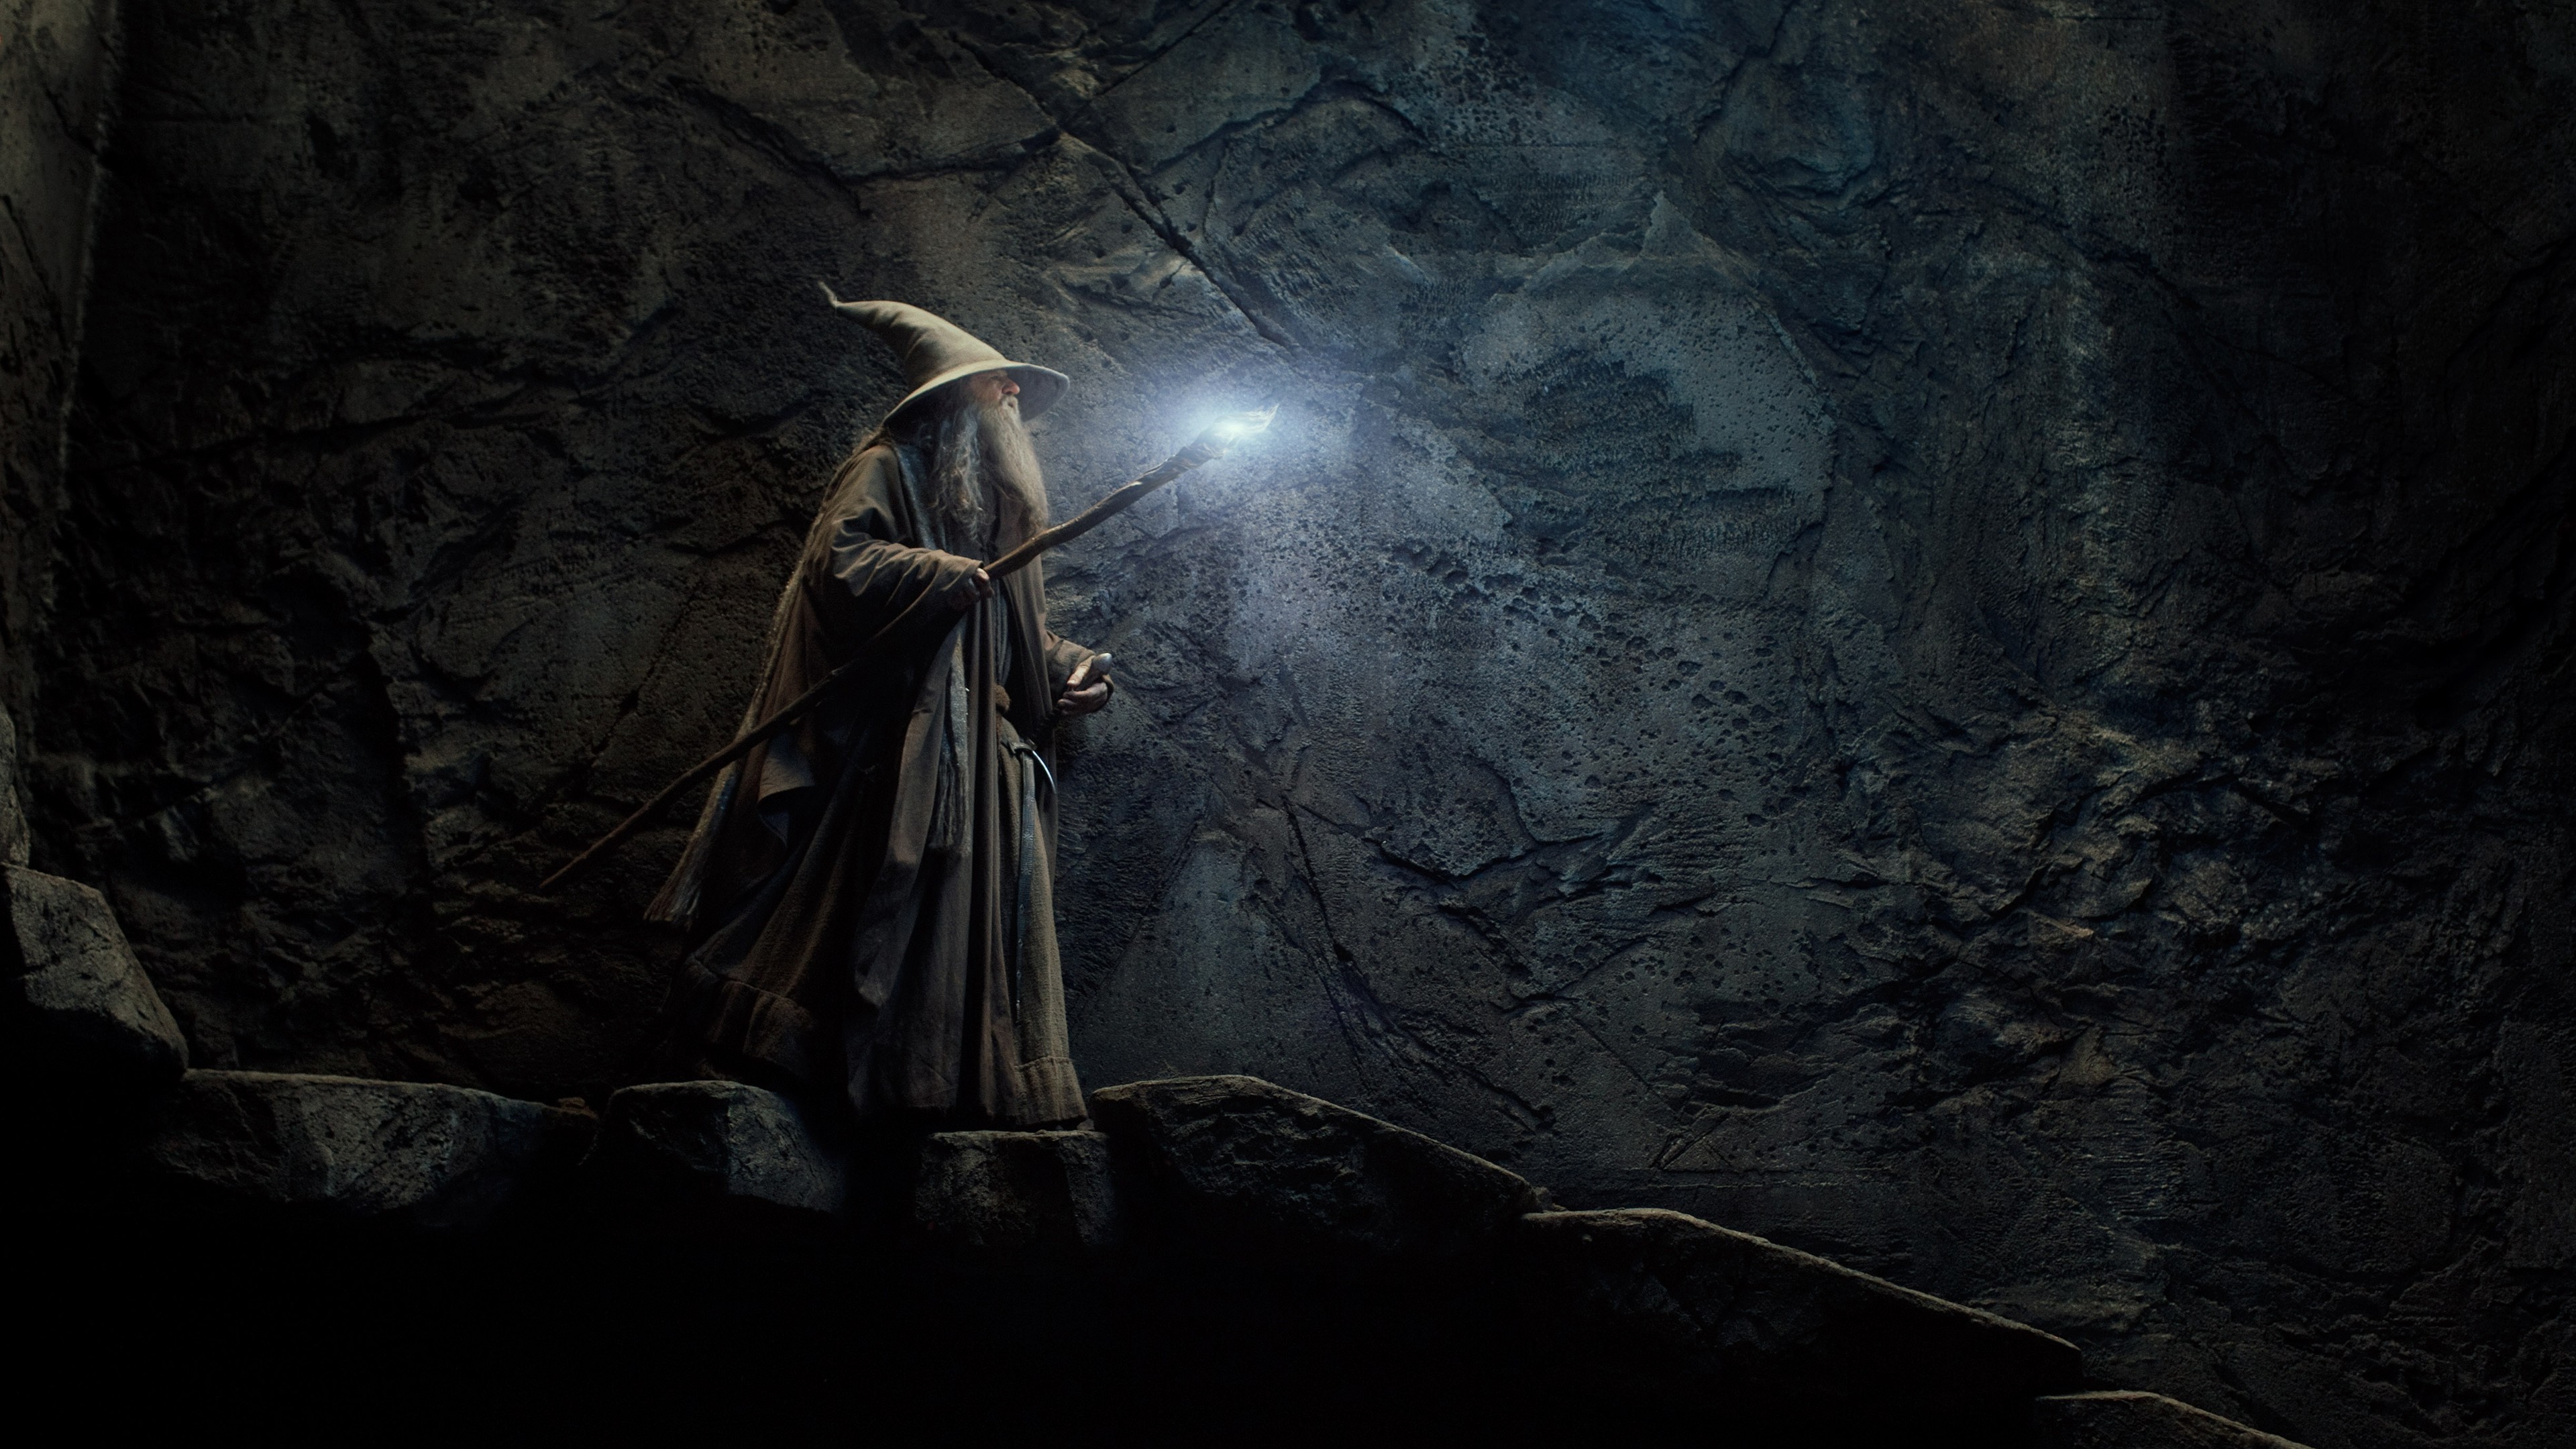 Movies The Lord Of The Rings The Hobbit The Hobbit The Desolation Of Smaug Gandalf 3840x2160